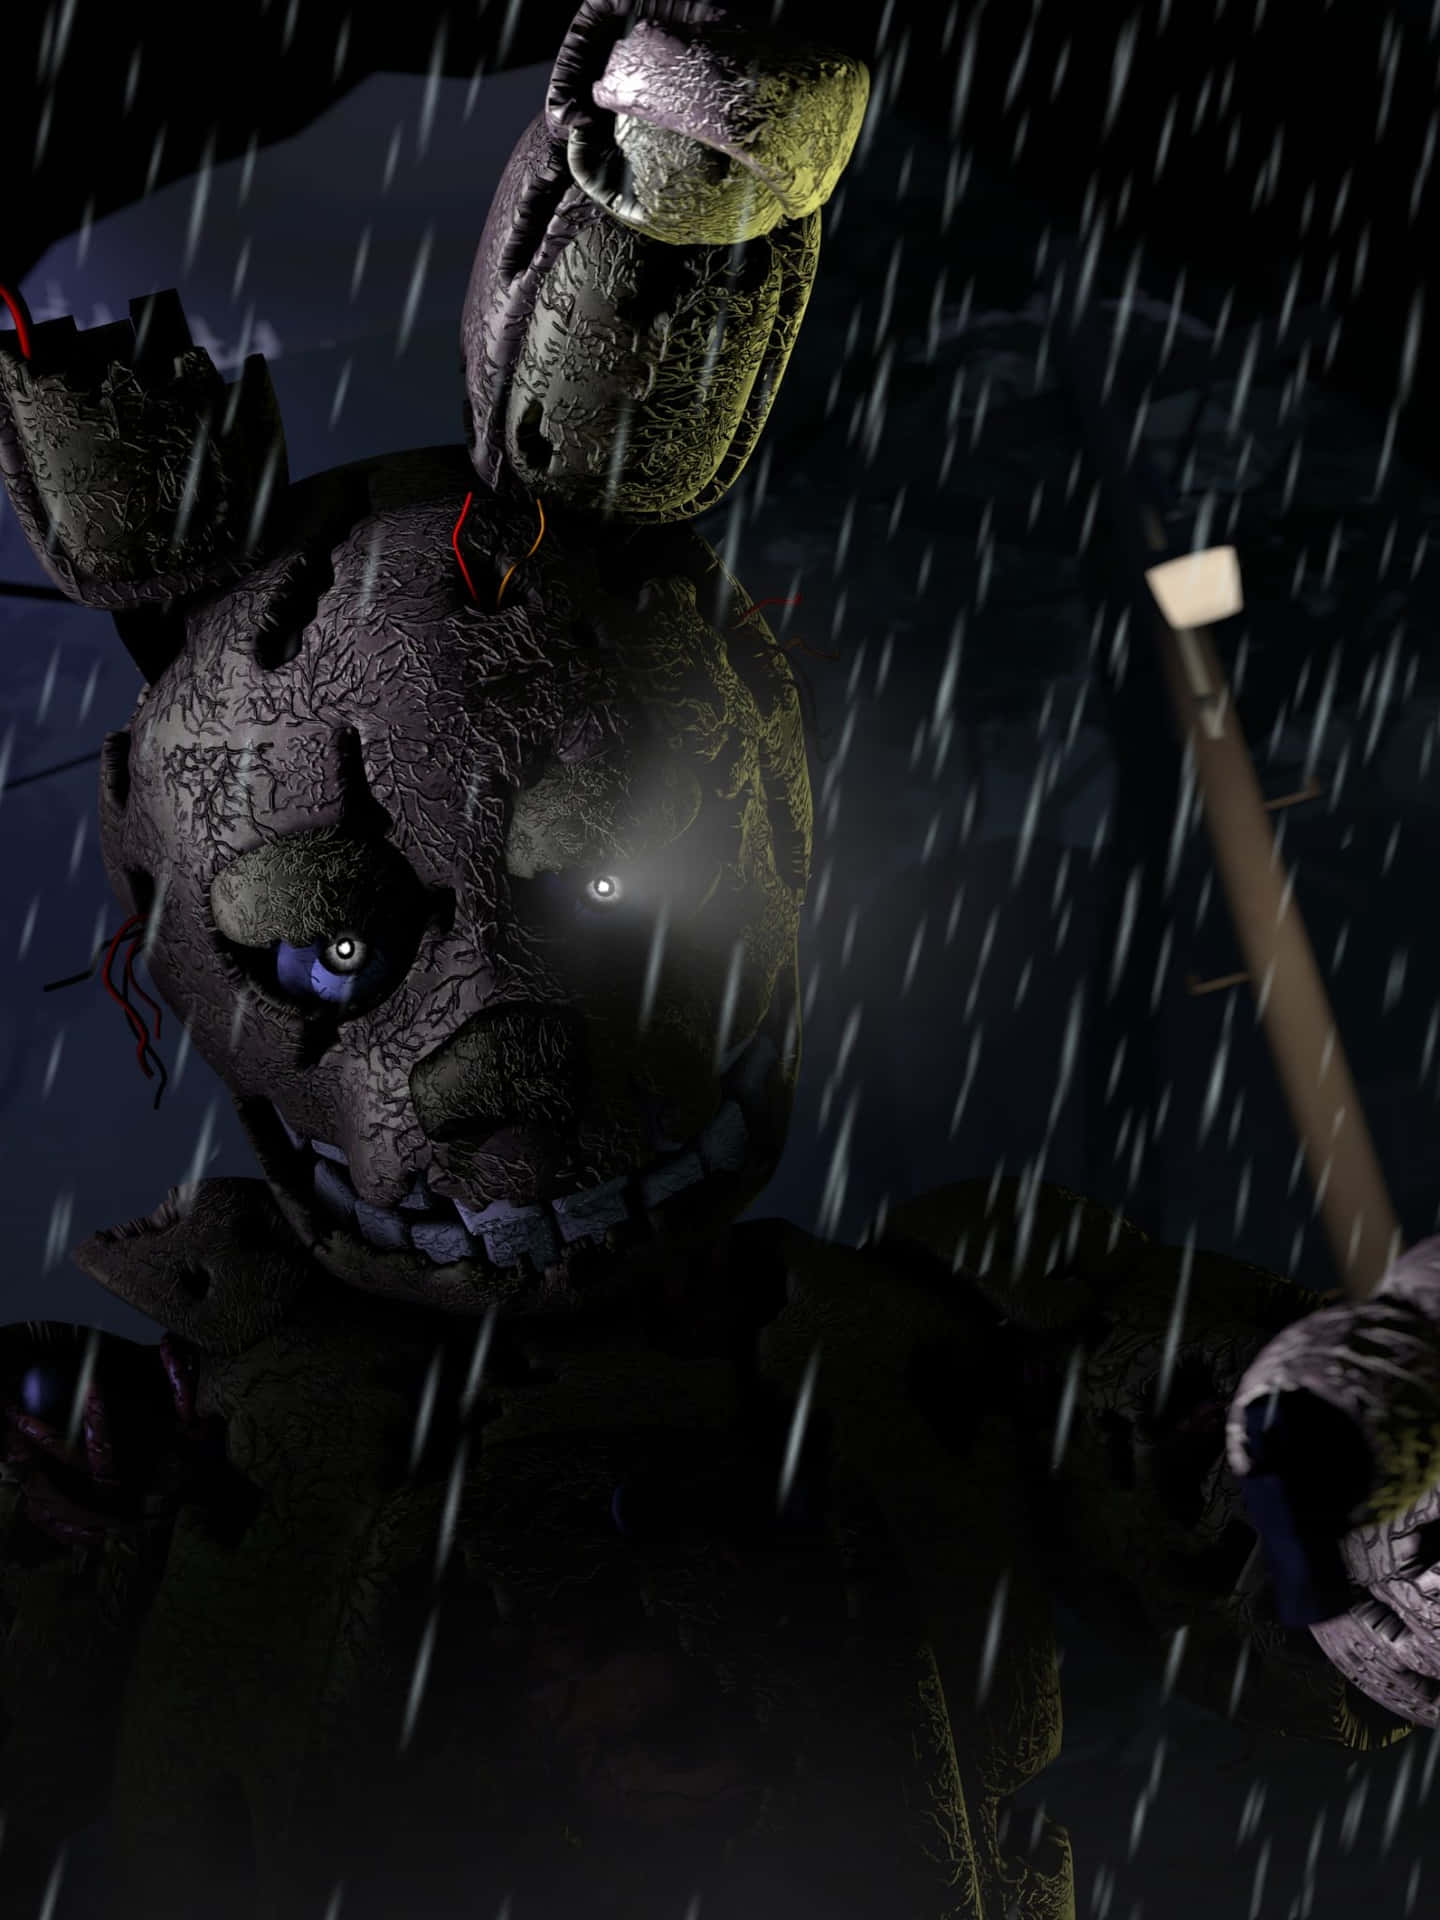 Get Ready To Play Five Nights At Freddy's On Your Iphone! Background